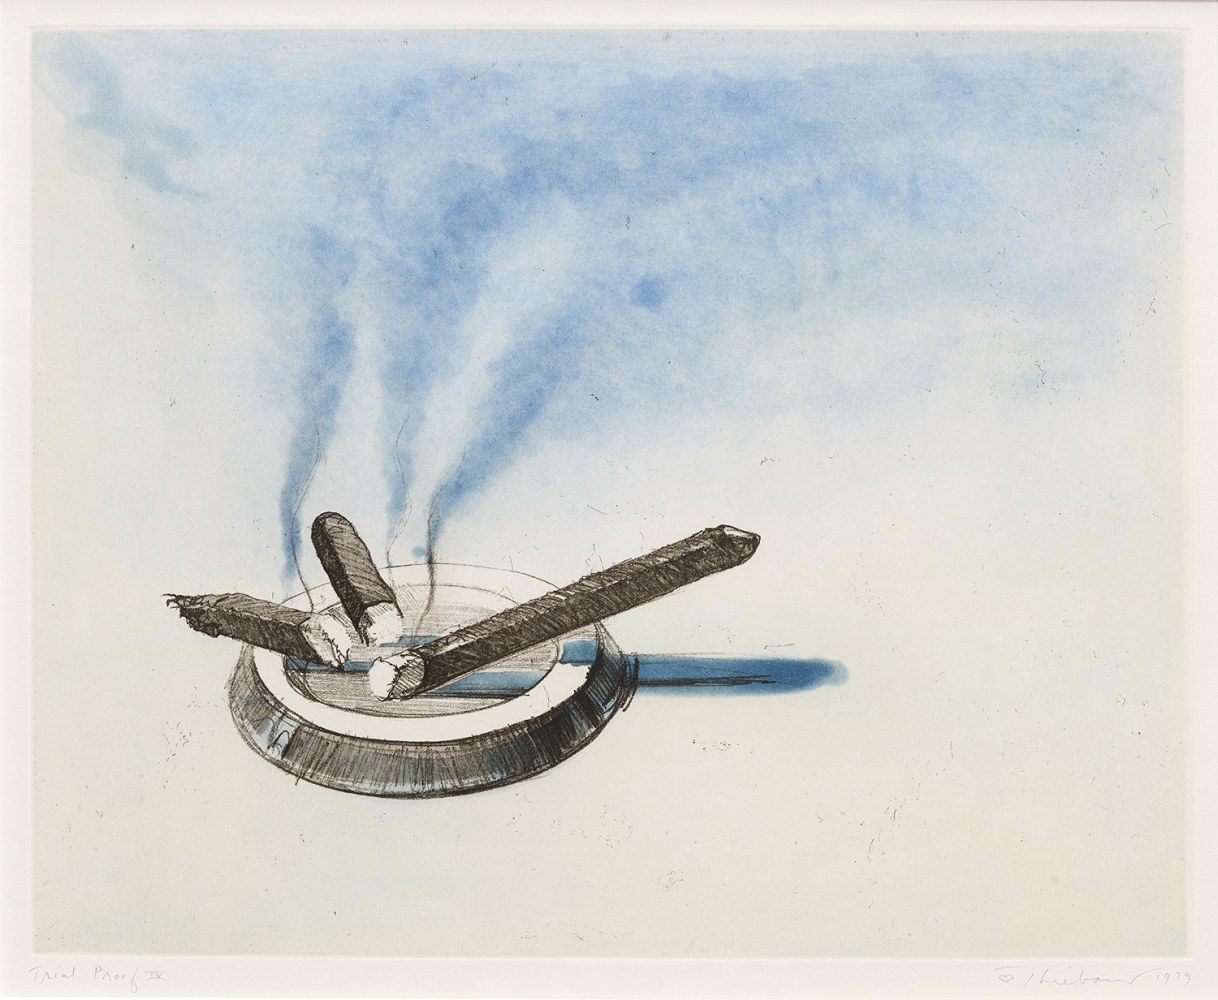 Wayne Thiebaud Cigars, 1979 soft ground etching, spit bite, A.P. 2 15 3/4 x 19 3/4 in. [image]; 22 3/4 x 29 3/4 in. [sheet]